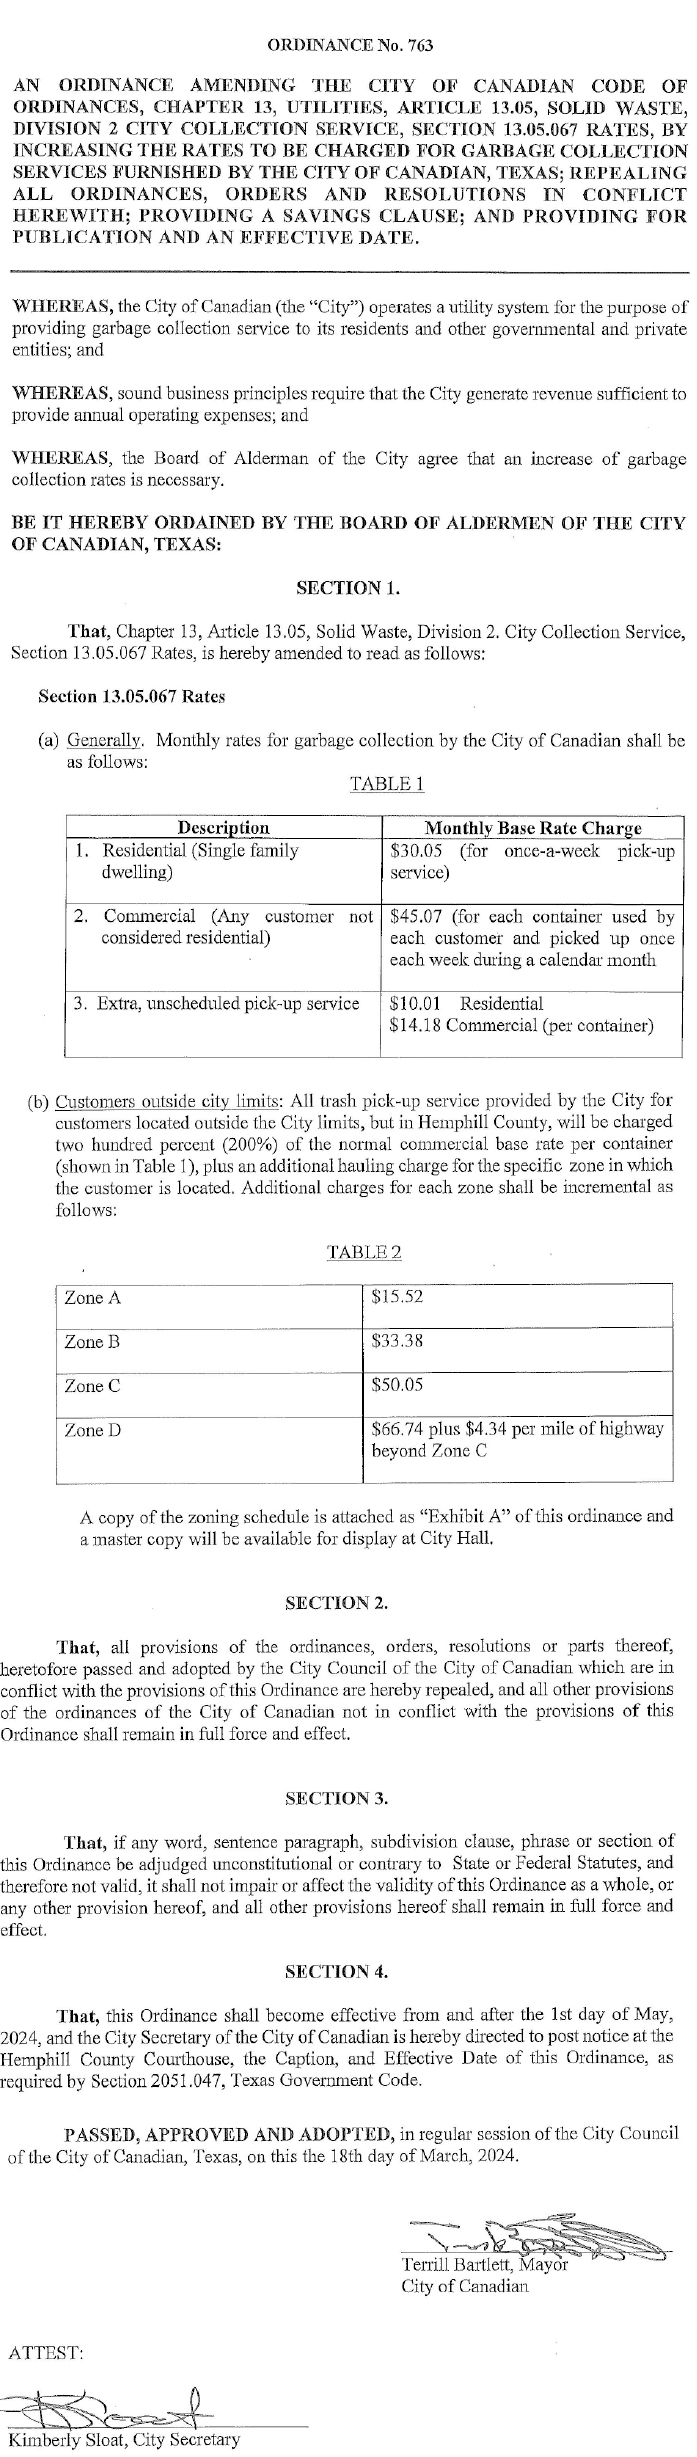 City Ordinance 763-Trash Collection Services